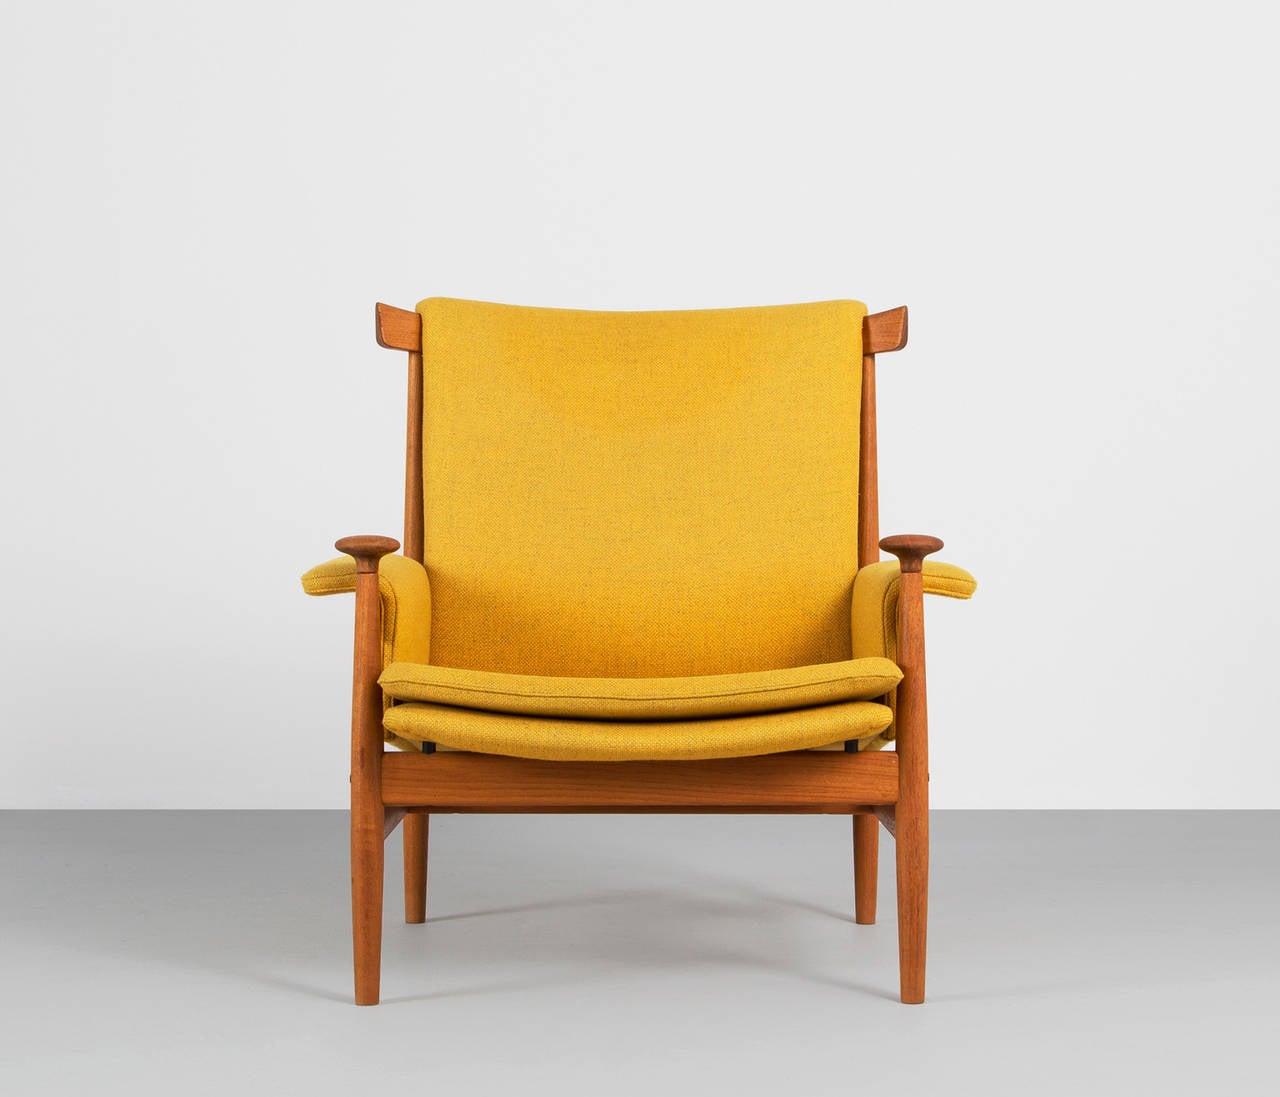 'Bwana' lounge chair, in teak and fabric, by Finn Juhl for France & Son, Denmark, 1950s. 

Excellent solid teak version of Finn Juhl's 'Bwana' chair. Superb wood details/joints which Finn Juhl is known for. Every detail of the chair is checked.